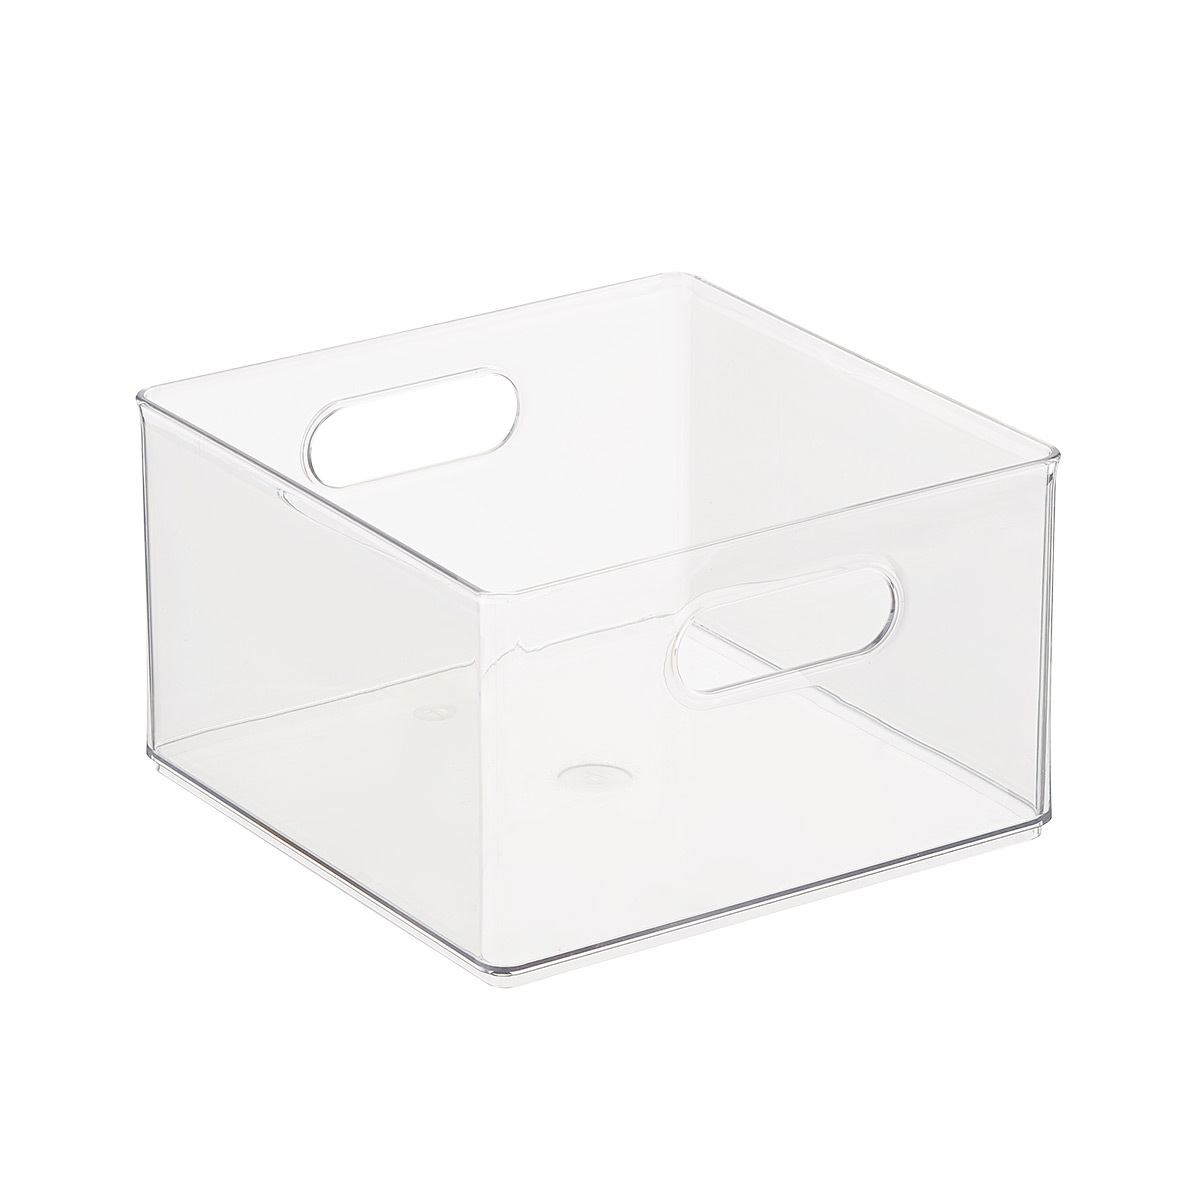 https://www.containerstore.com/catalogimages/363998/10077086-T.H.E.-all-purpose-bin-v2.jpg